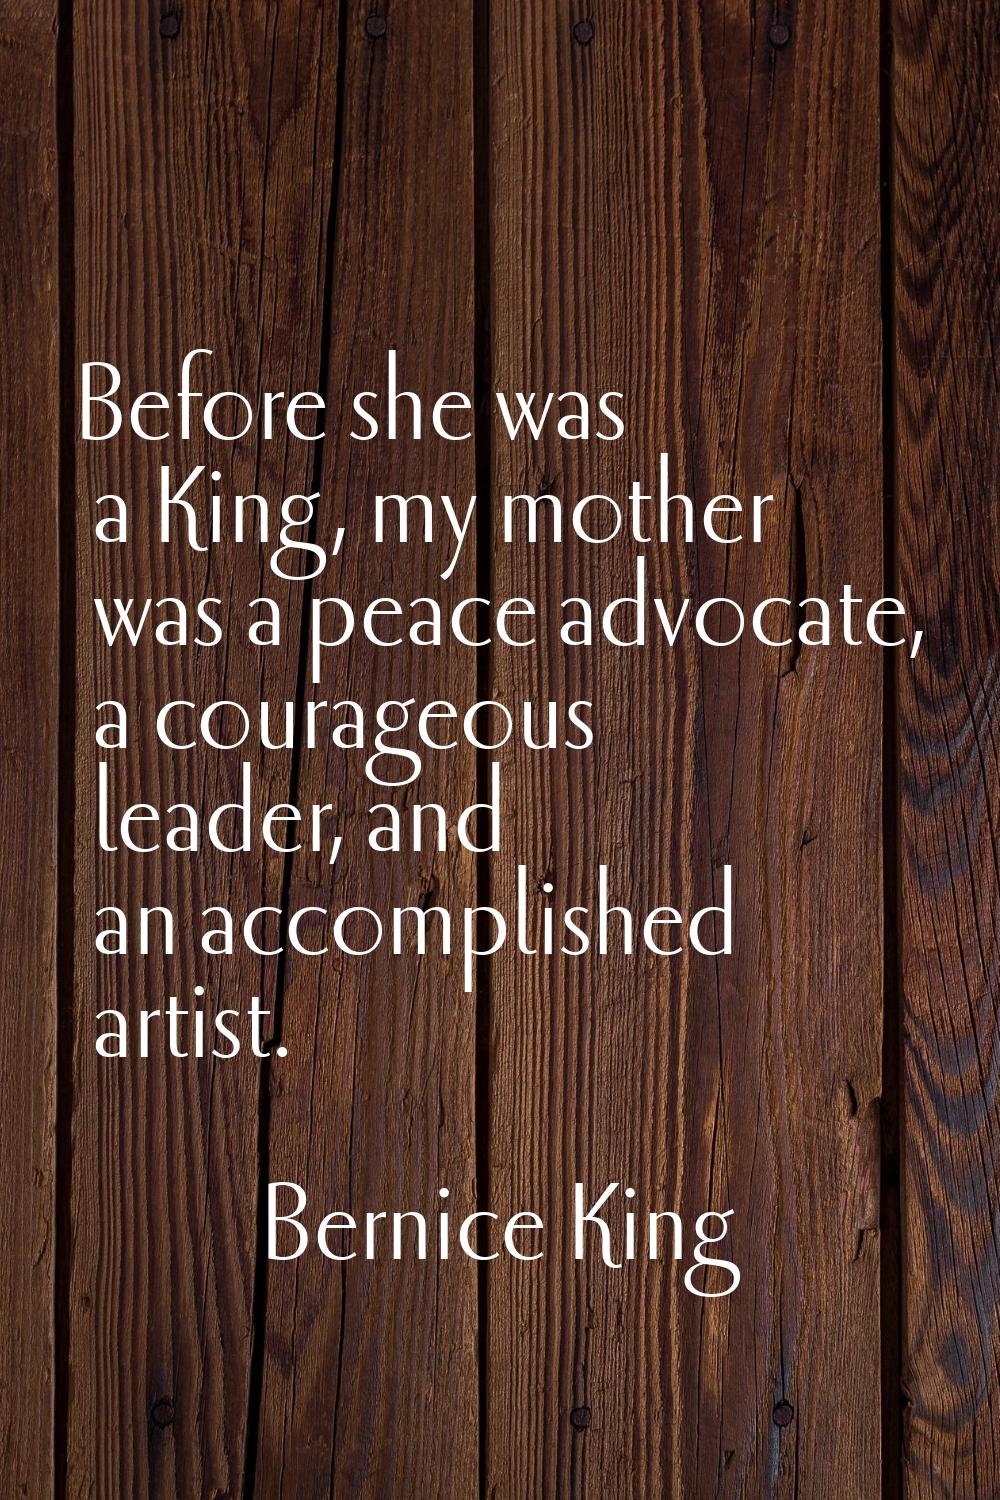 Before she was a King, my mother was a peace advocate, a courageous leader, and an accomplished art